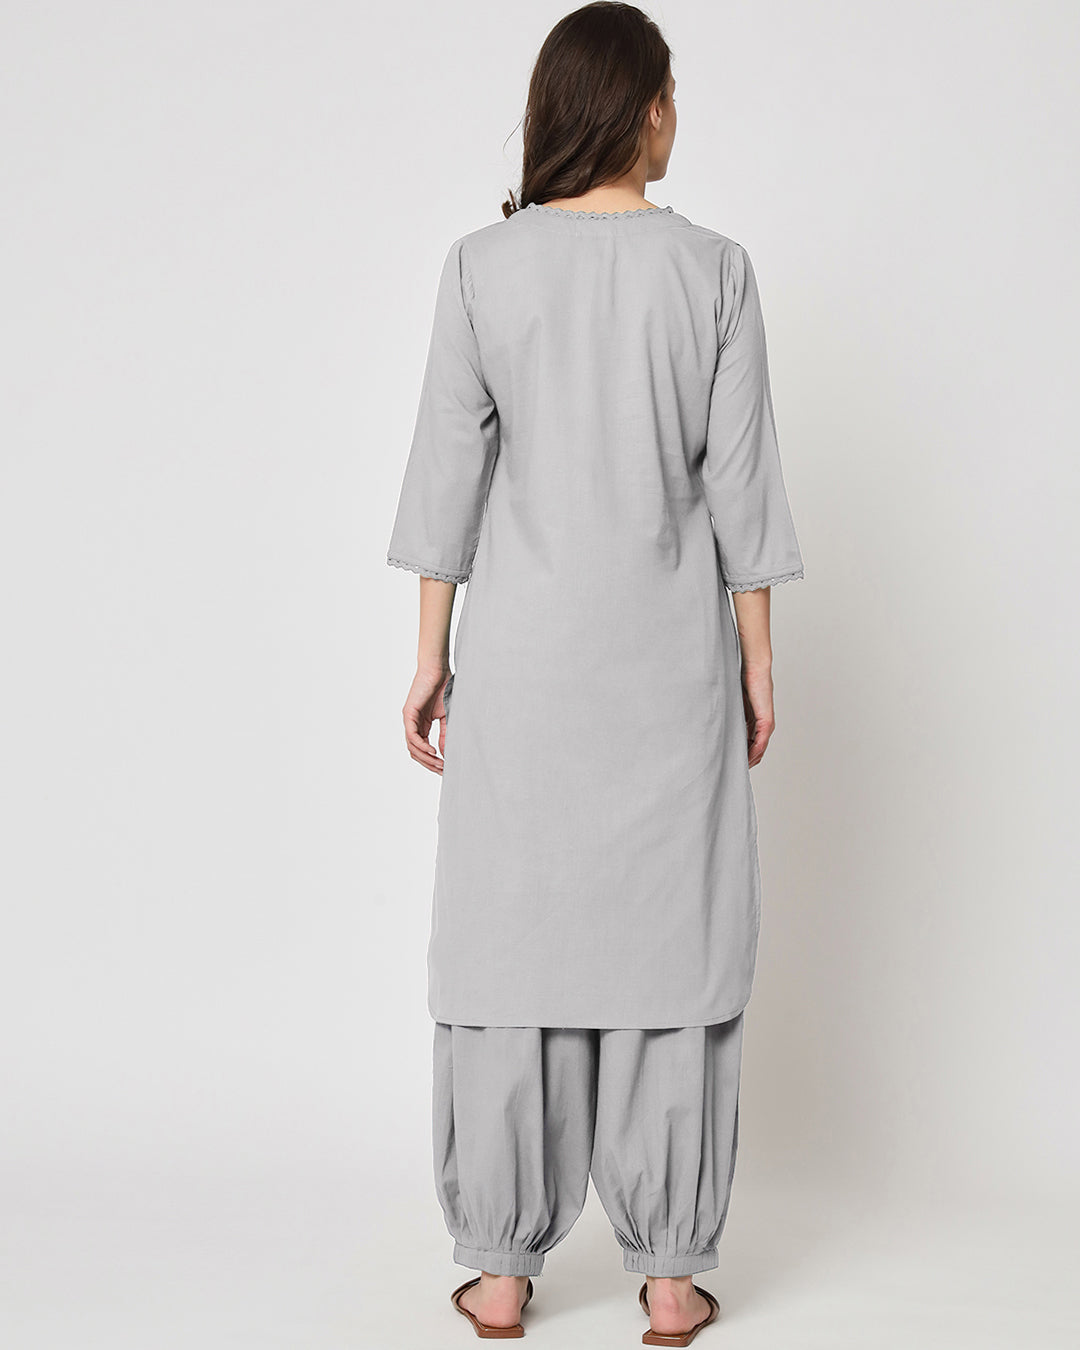 Iced Grey Lace Affair Solid Kurta (Without Bottoms)